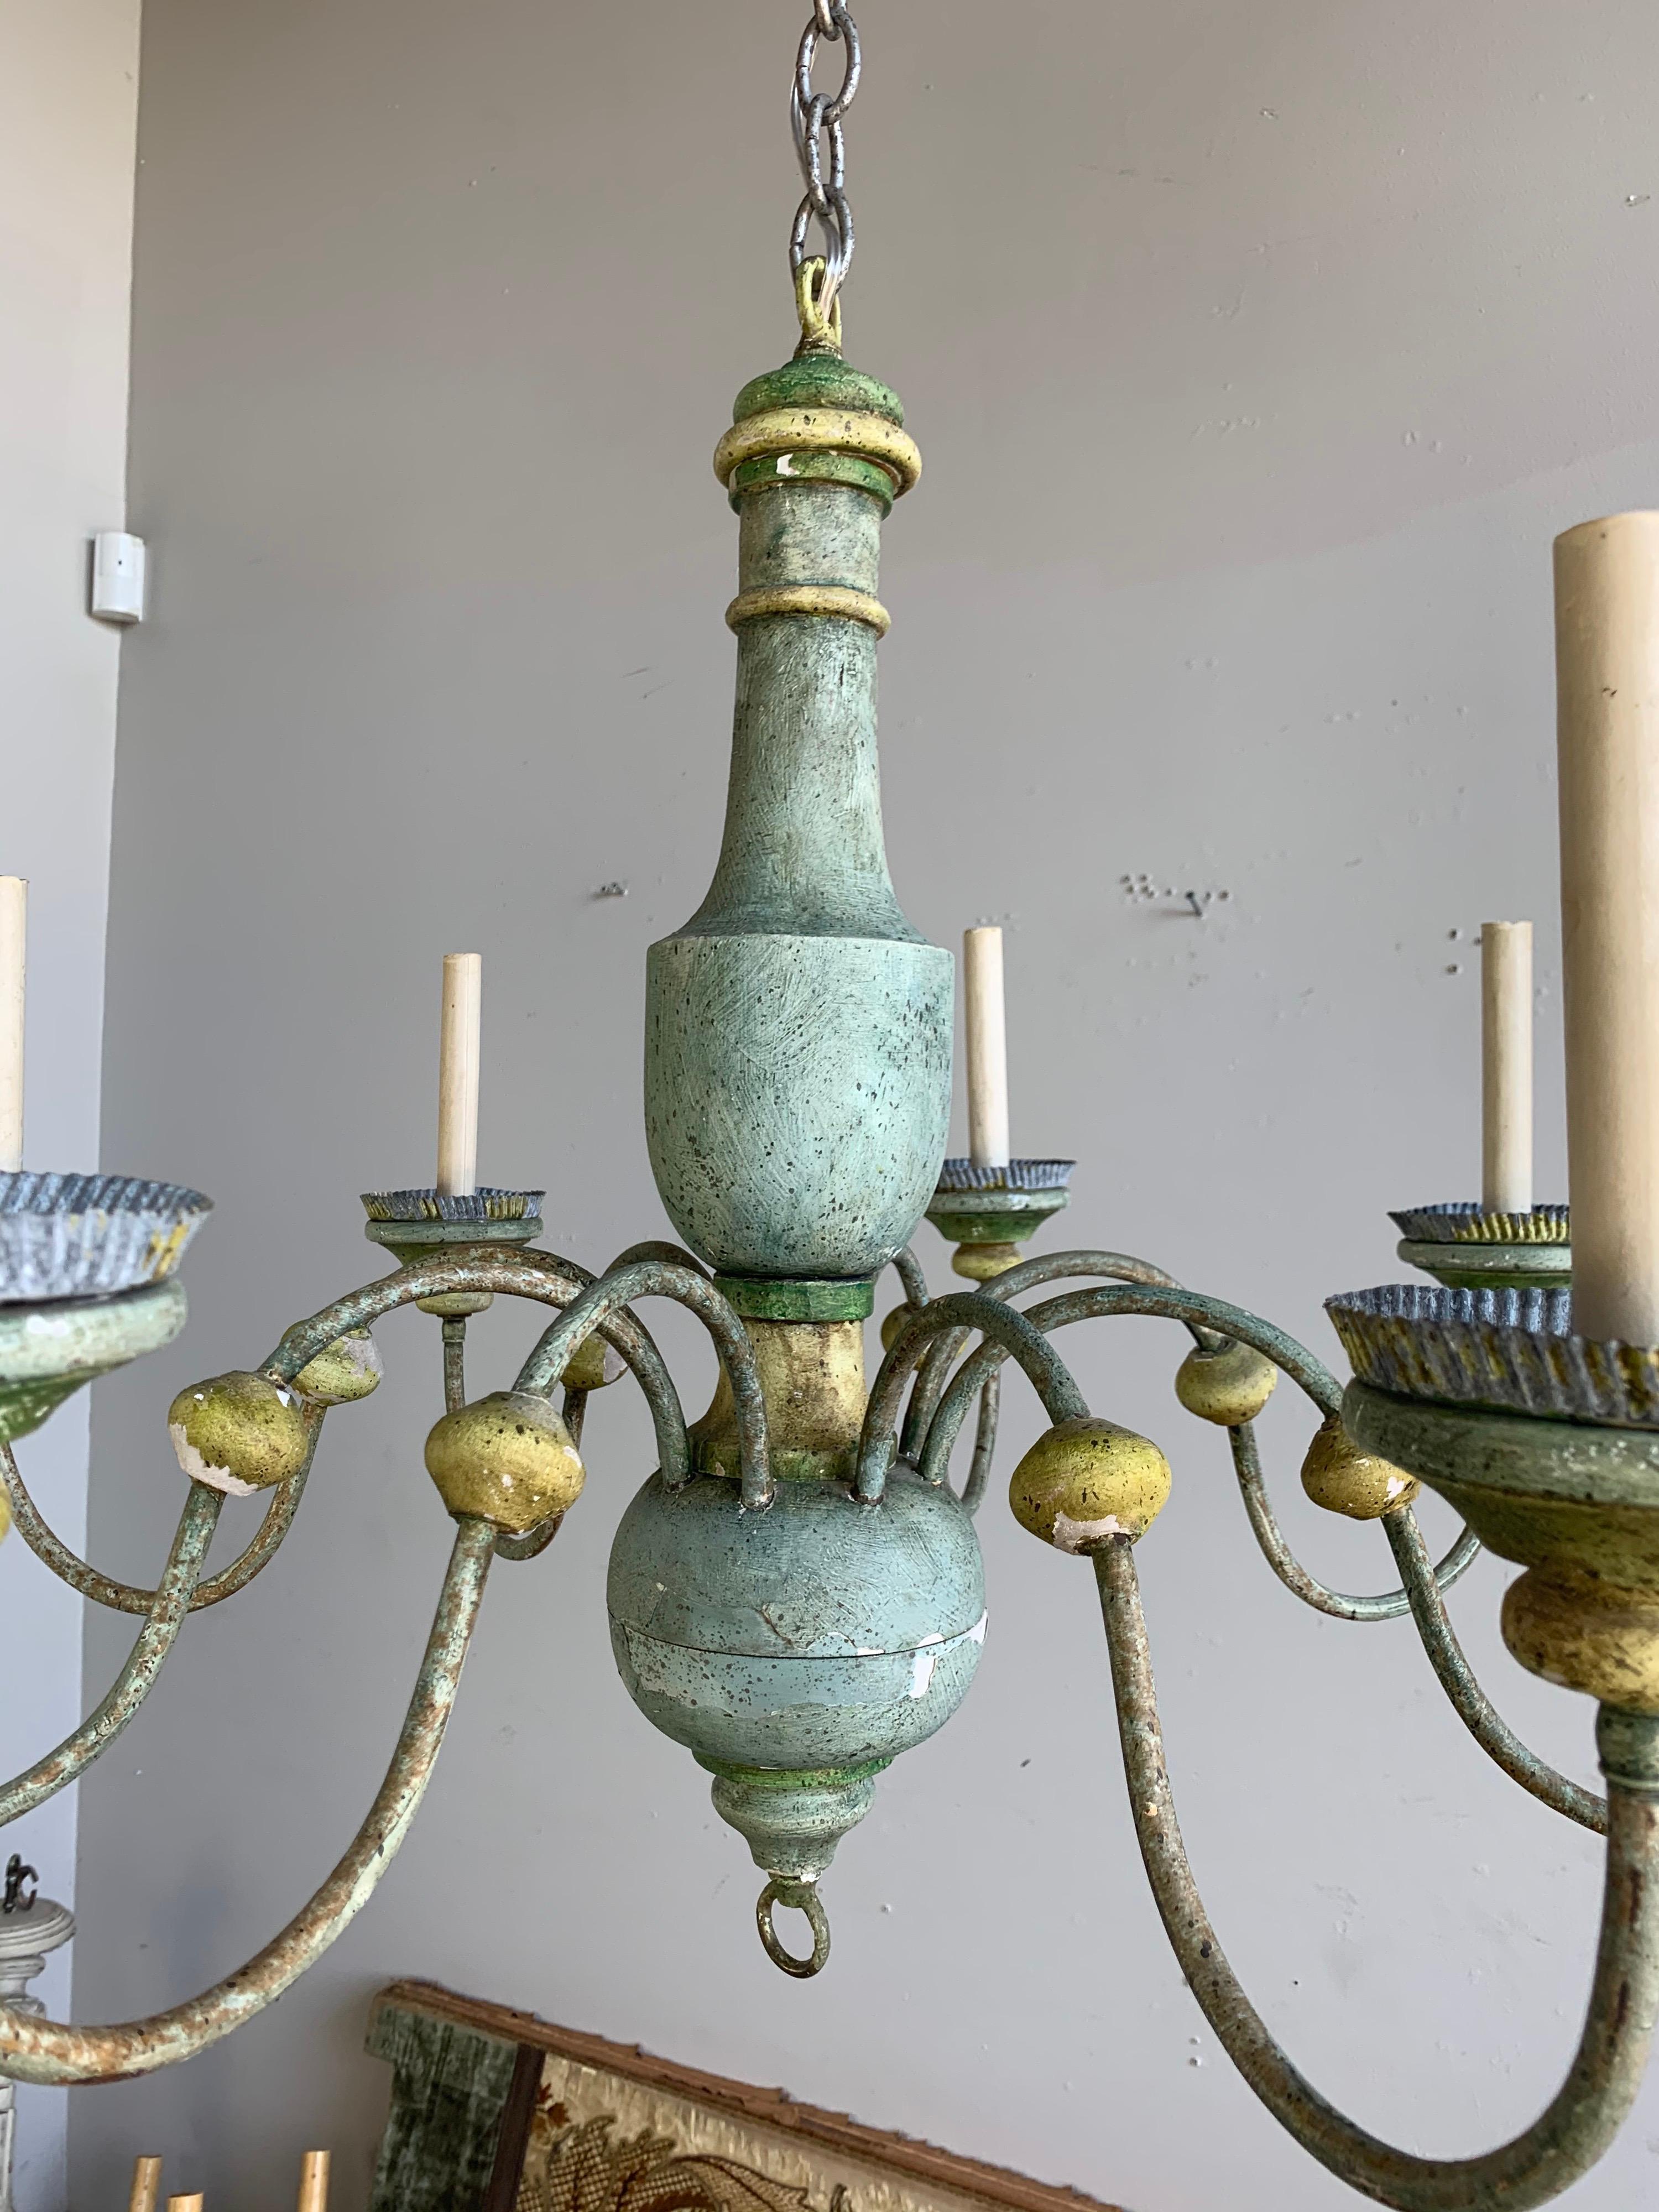 8-light Italian painted wood chandelier in soft shades of blue, green and gold. The are 8 iron arms that end in wood and metal bobeches. The fixture is wired and ready to install with chain and canopy included.